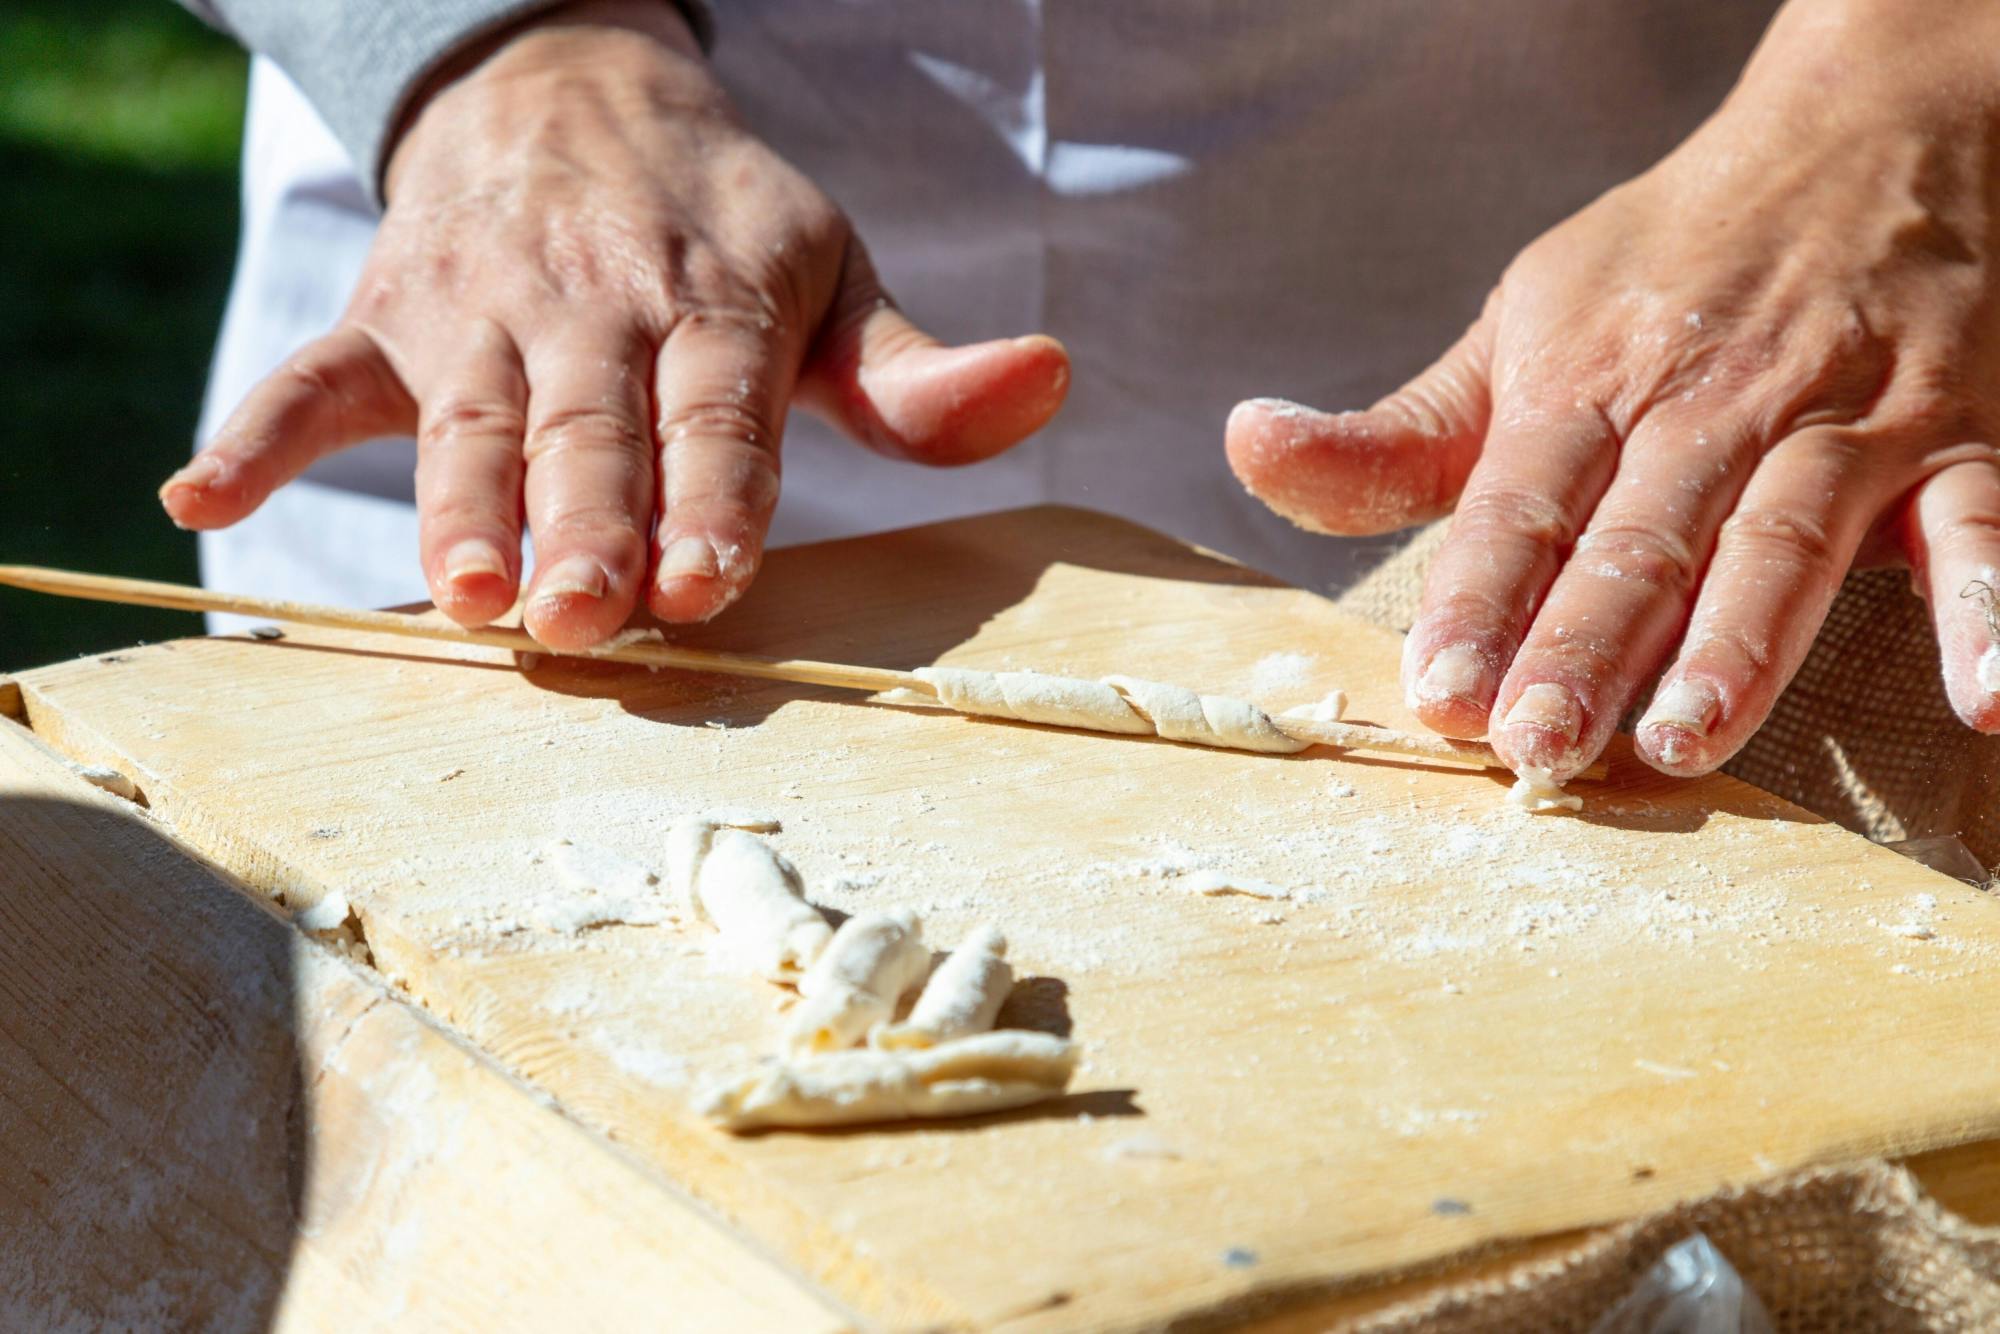 Cheese-Making and Pasta Class with Local Lunch